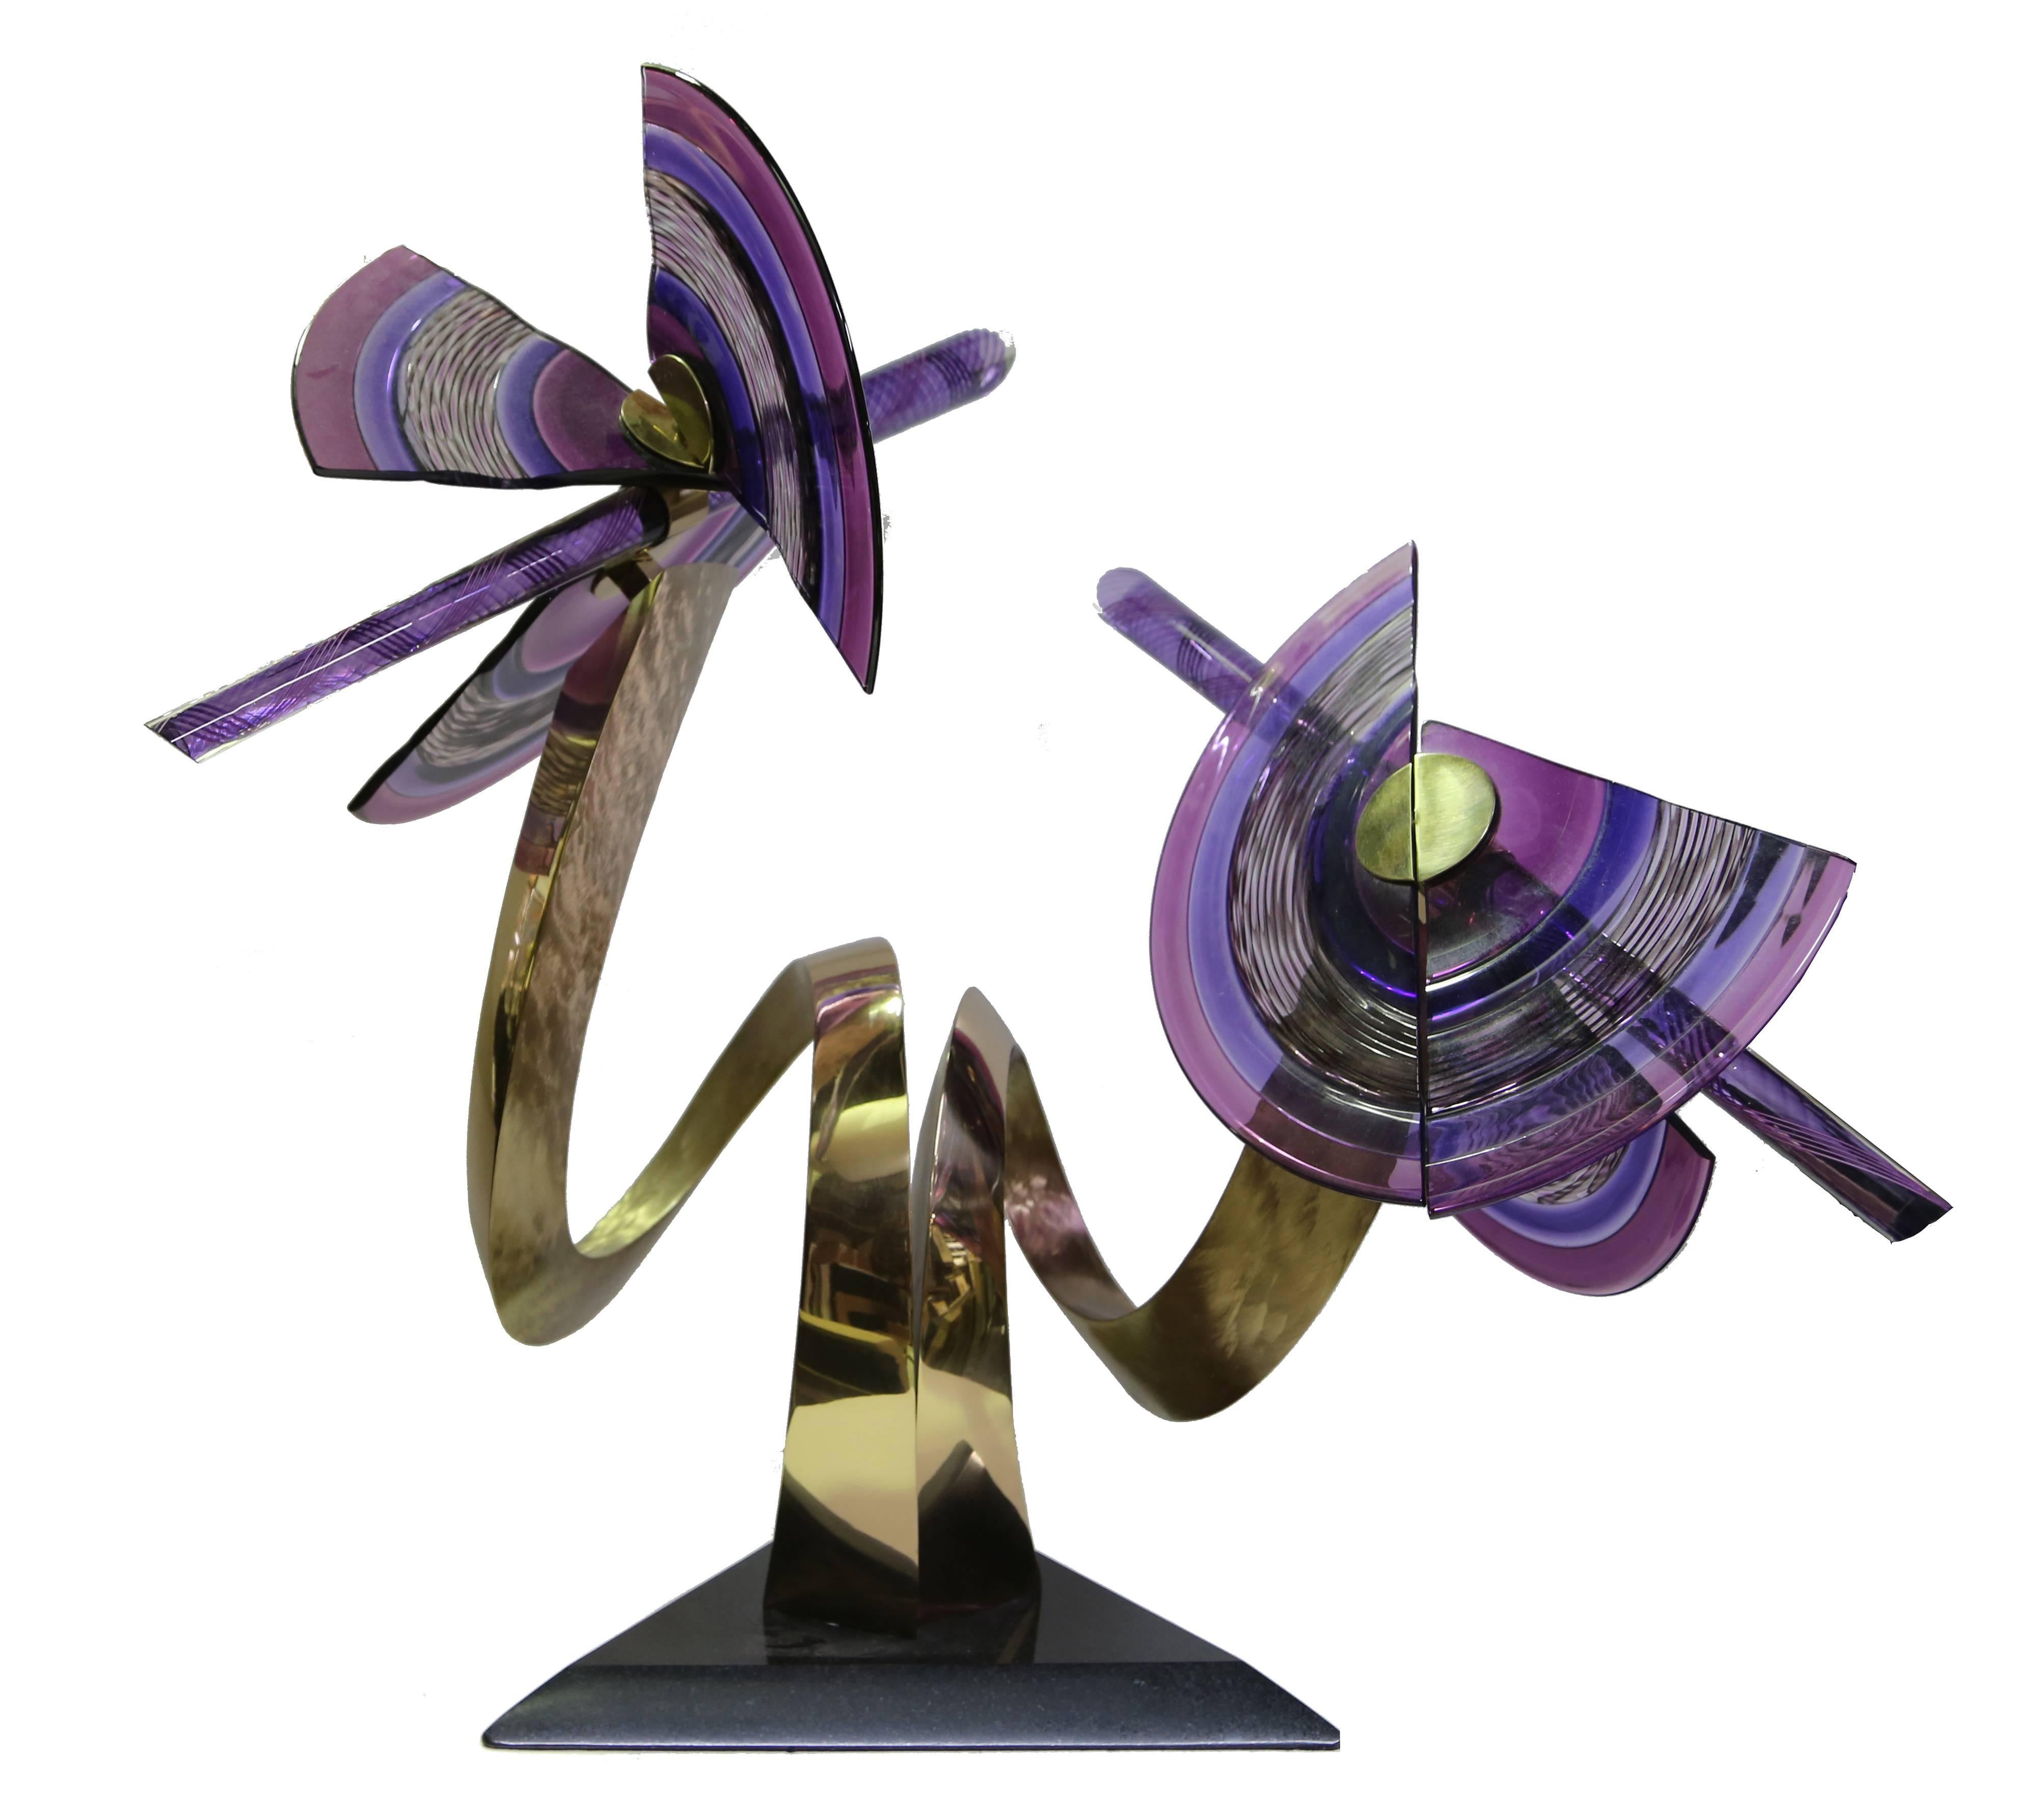 Attitudes, Glass and Polished Brass Sculpture by Jaworksi